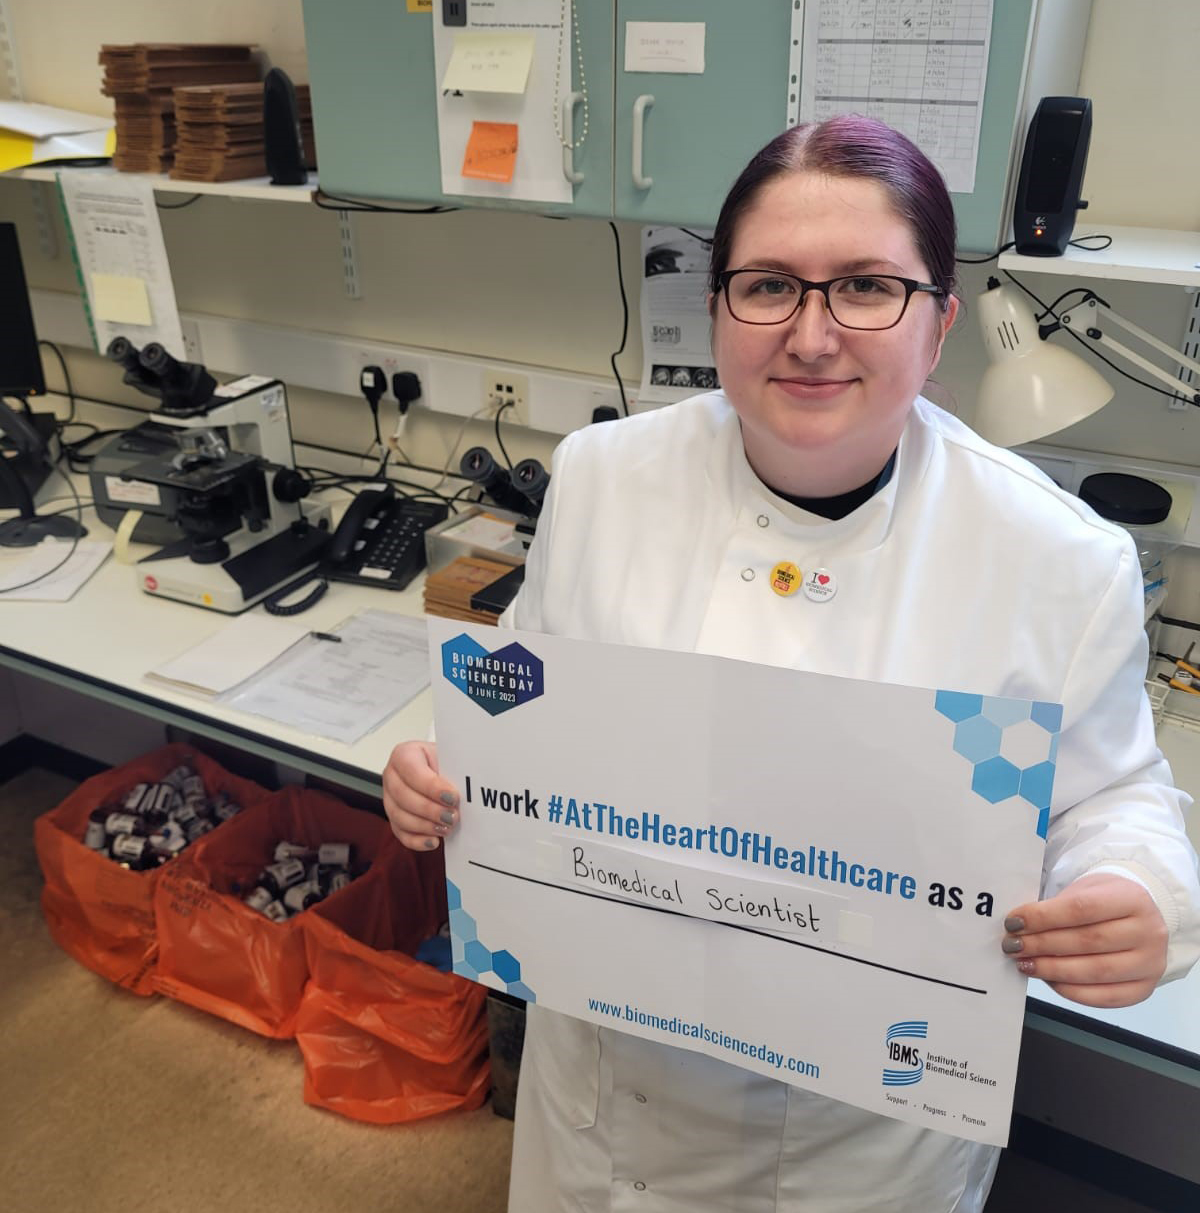 Elisha Hughes in a lab holding a BMS certificate noting that they work as a biomedical scientist